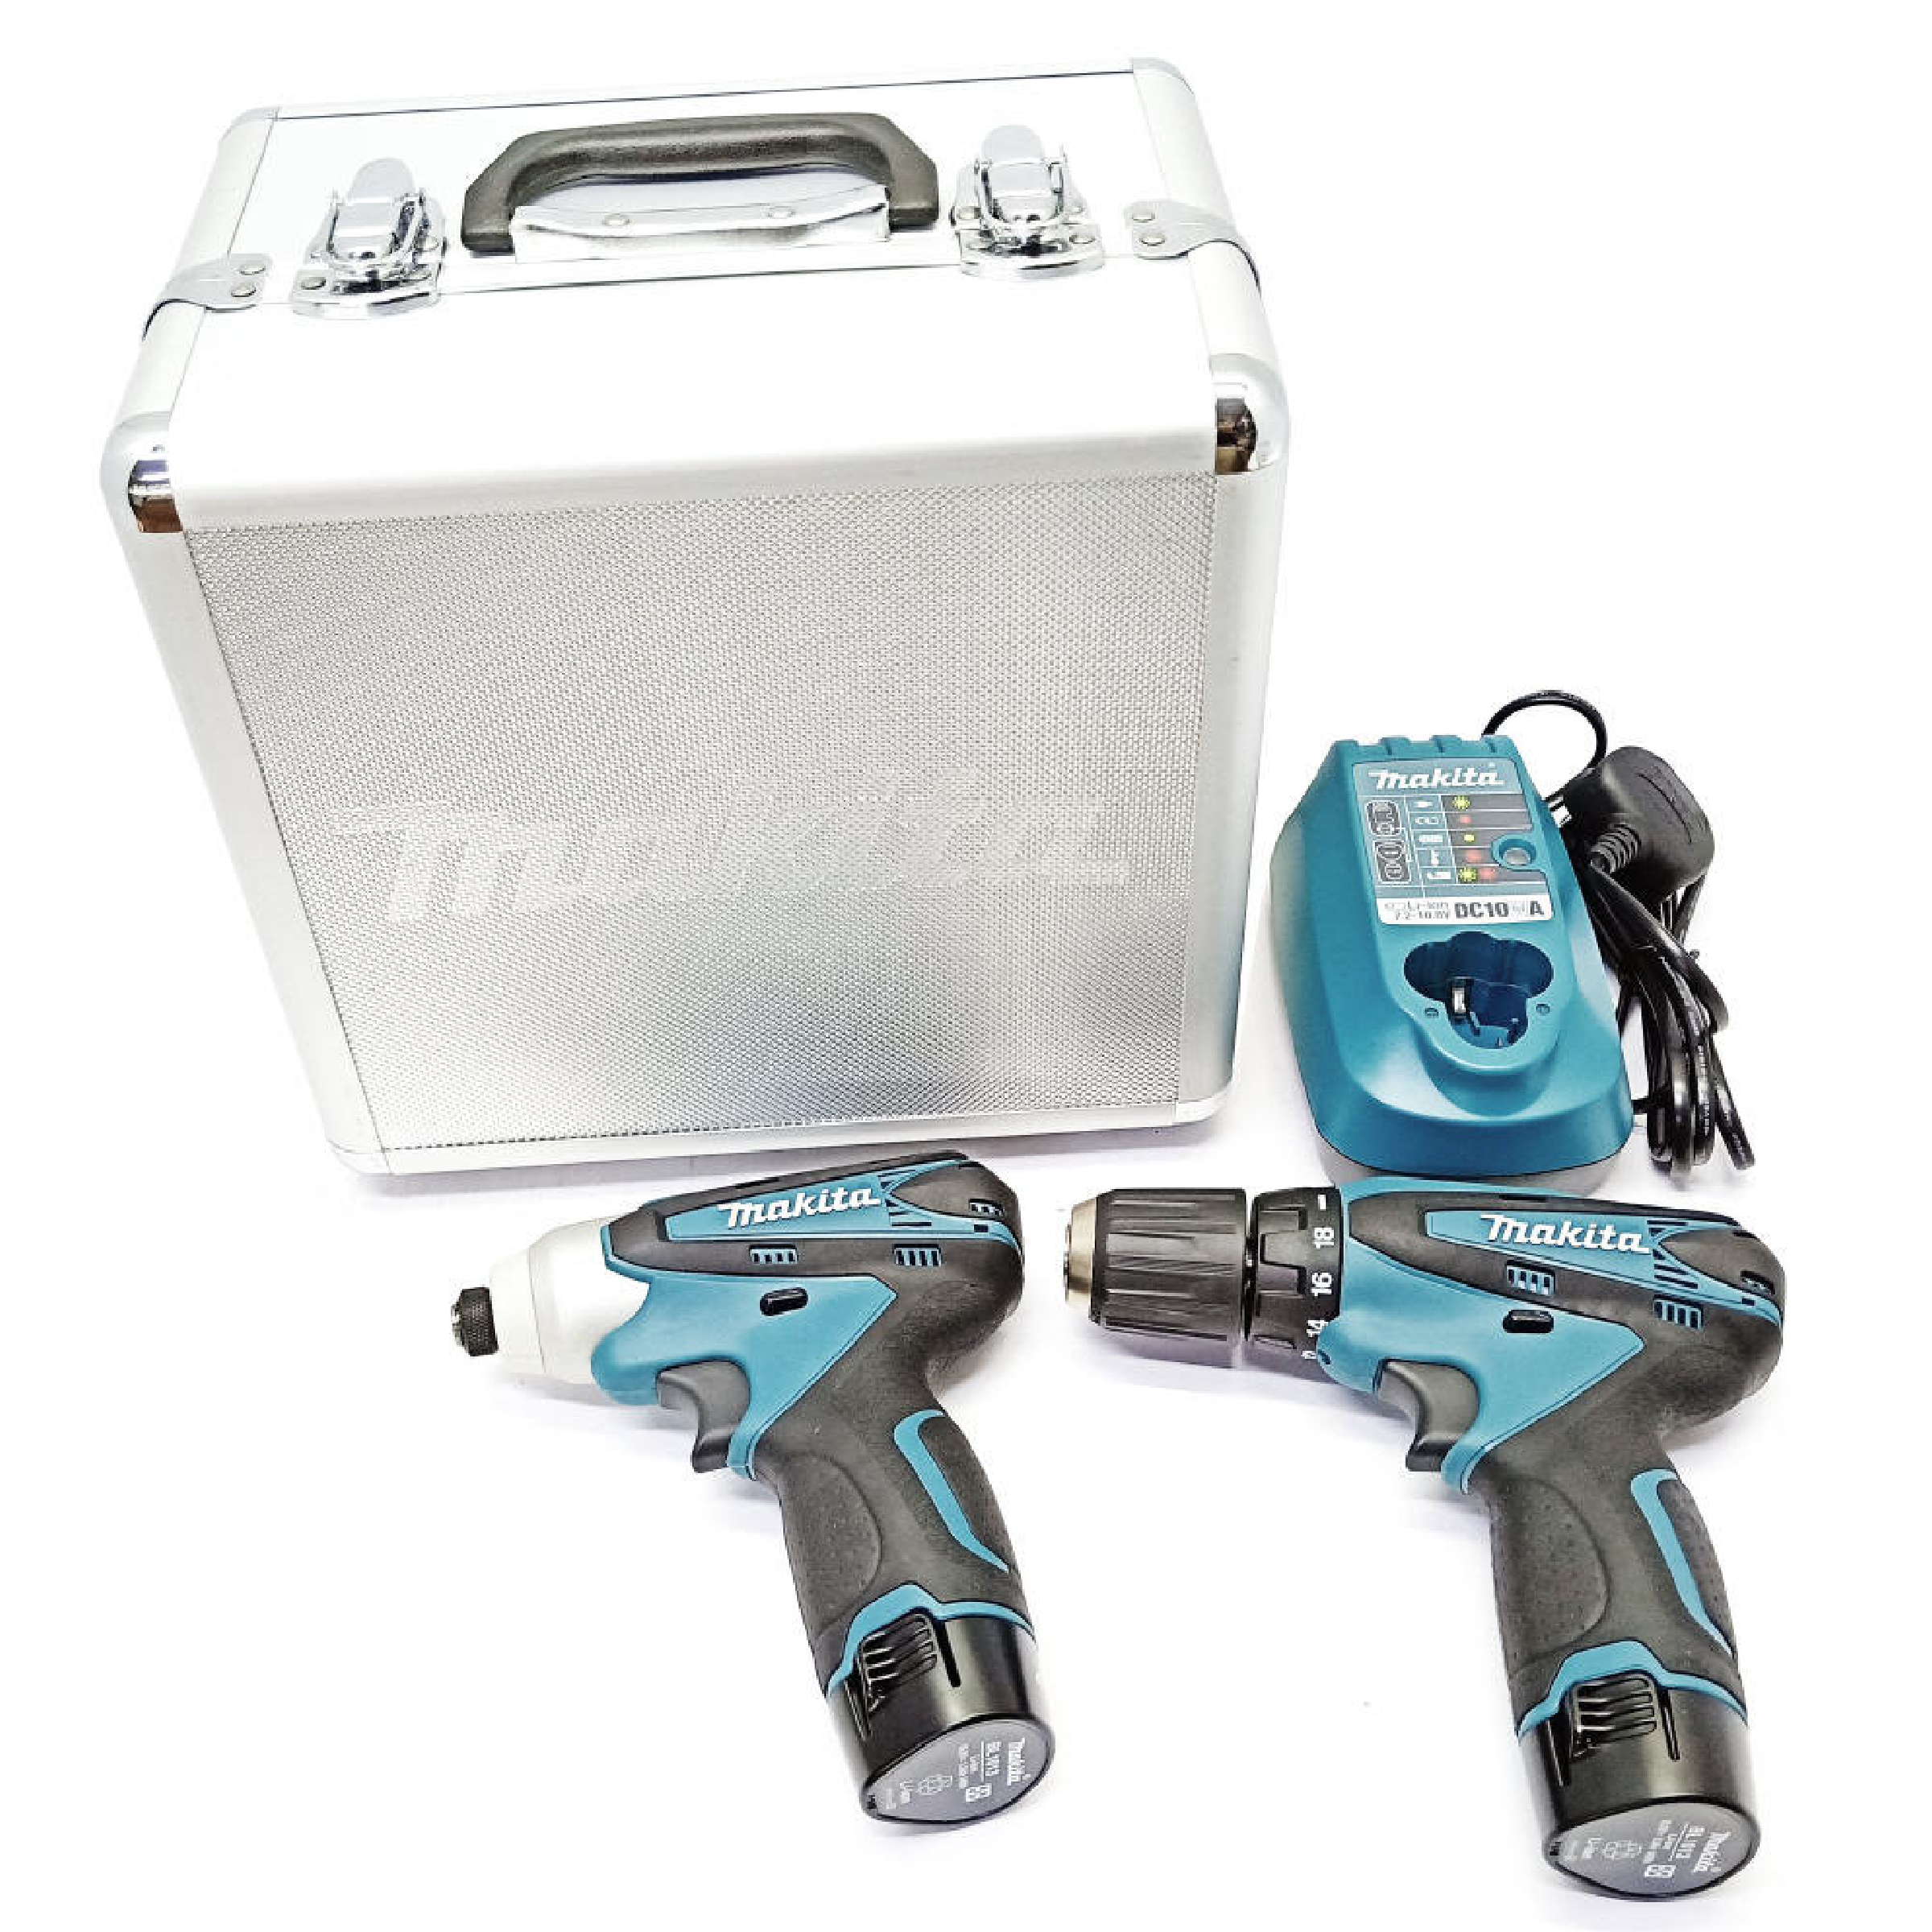 Makita LCT204 10.8V LI-ION 2 PIECE KIT Complete With Drill Driver & Impact Driver (DF330+TD090)